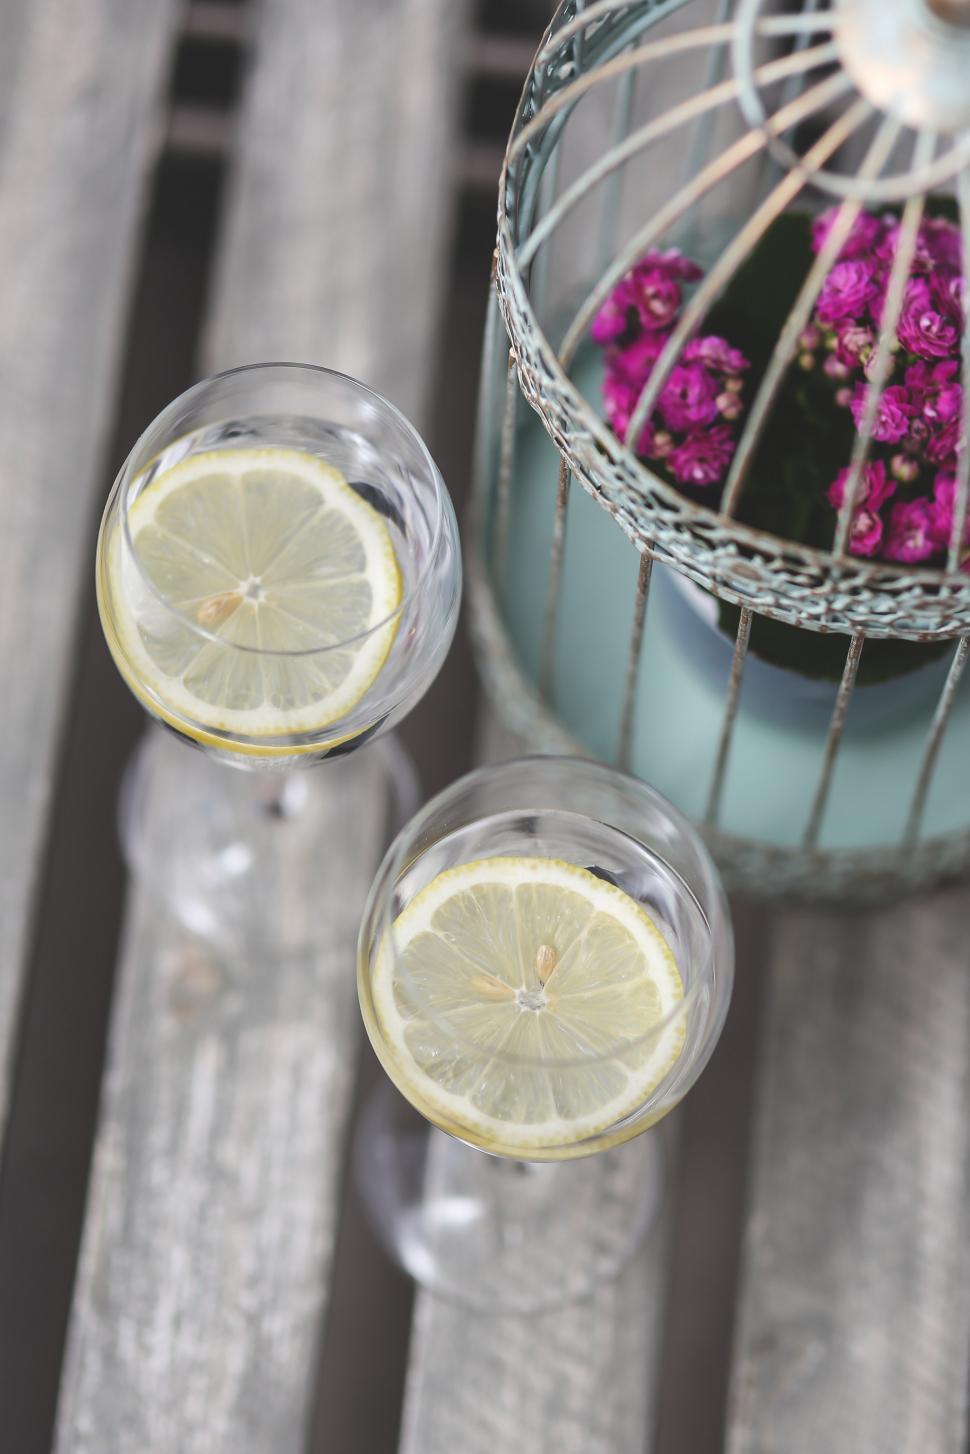 Free Image of Two Glasses of Lemonade With a Birdcage in the Background 